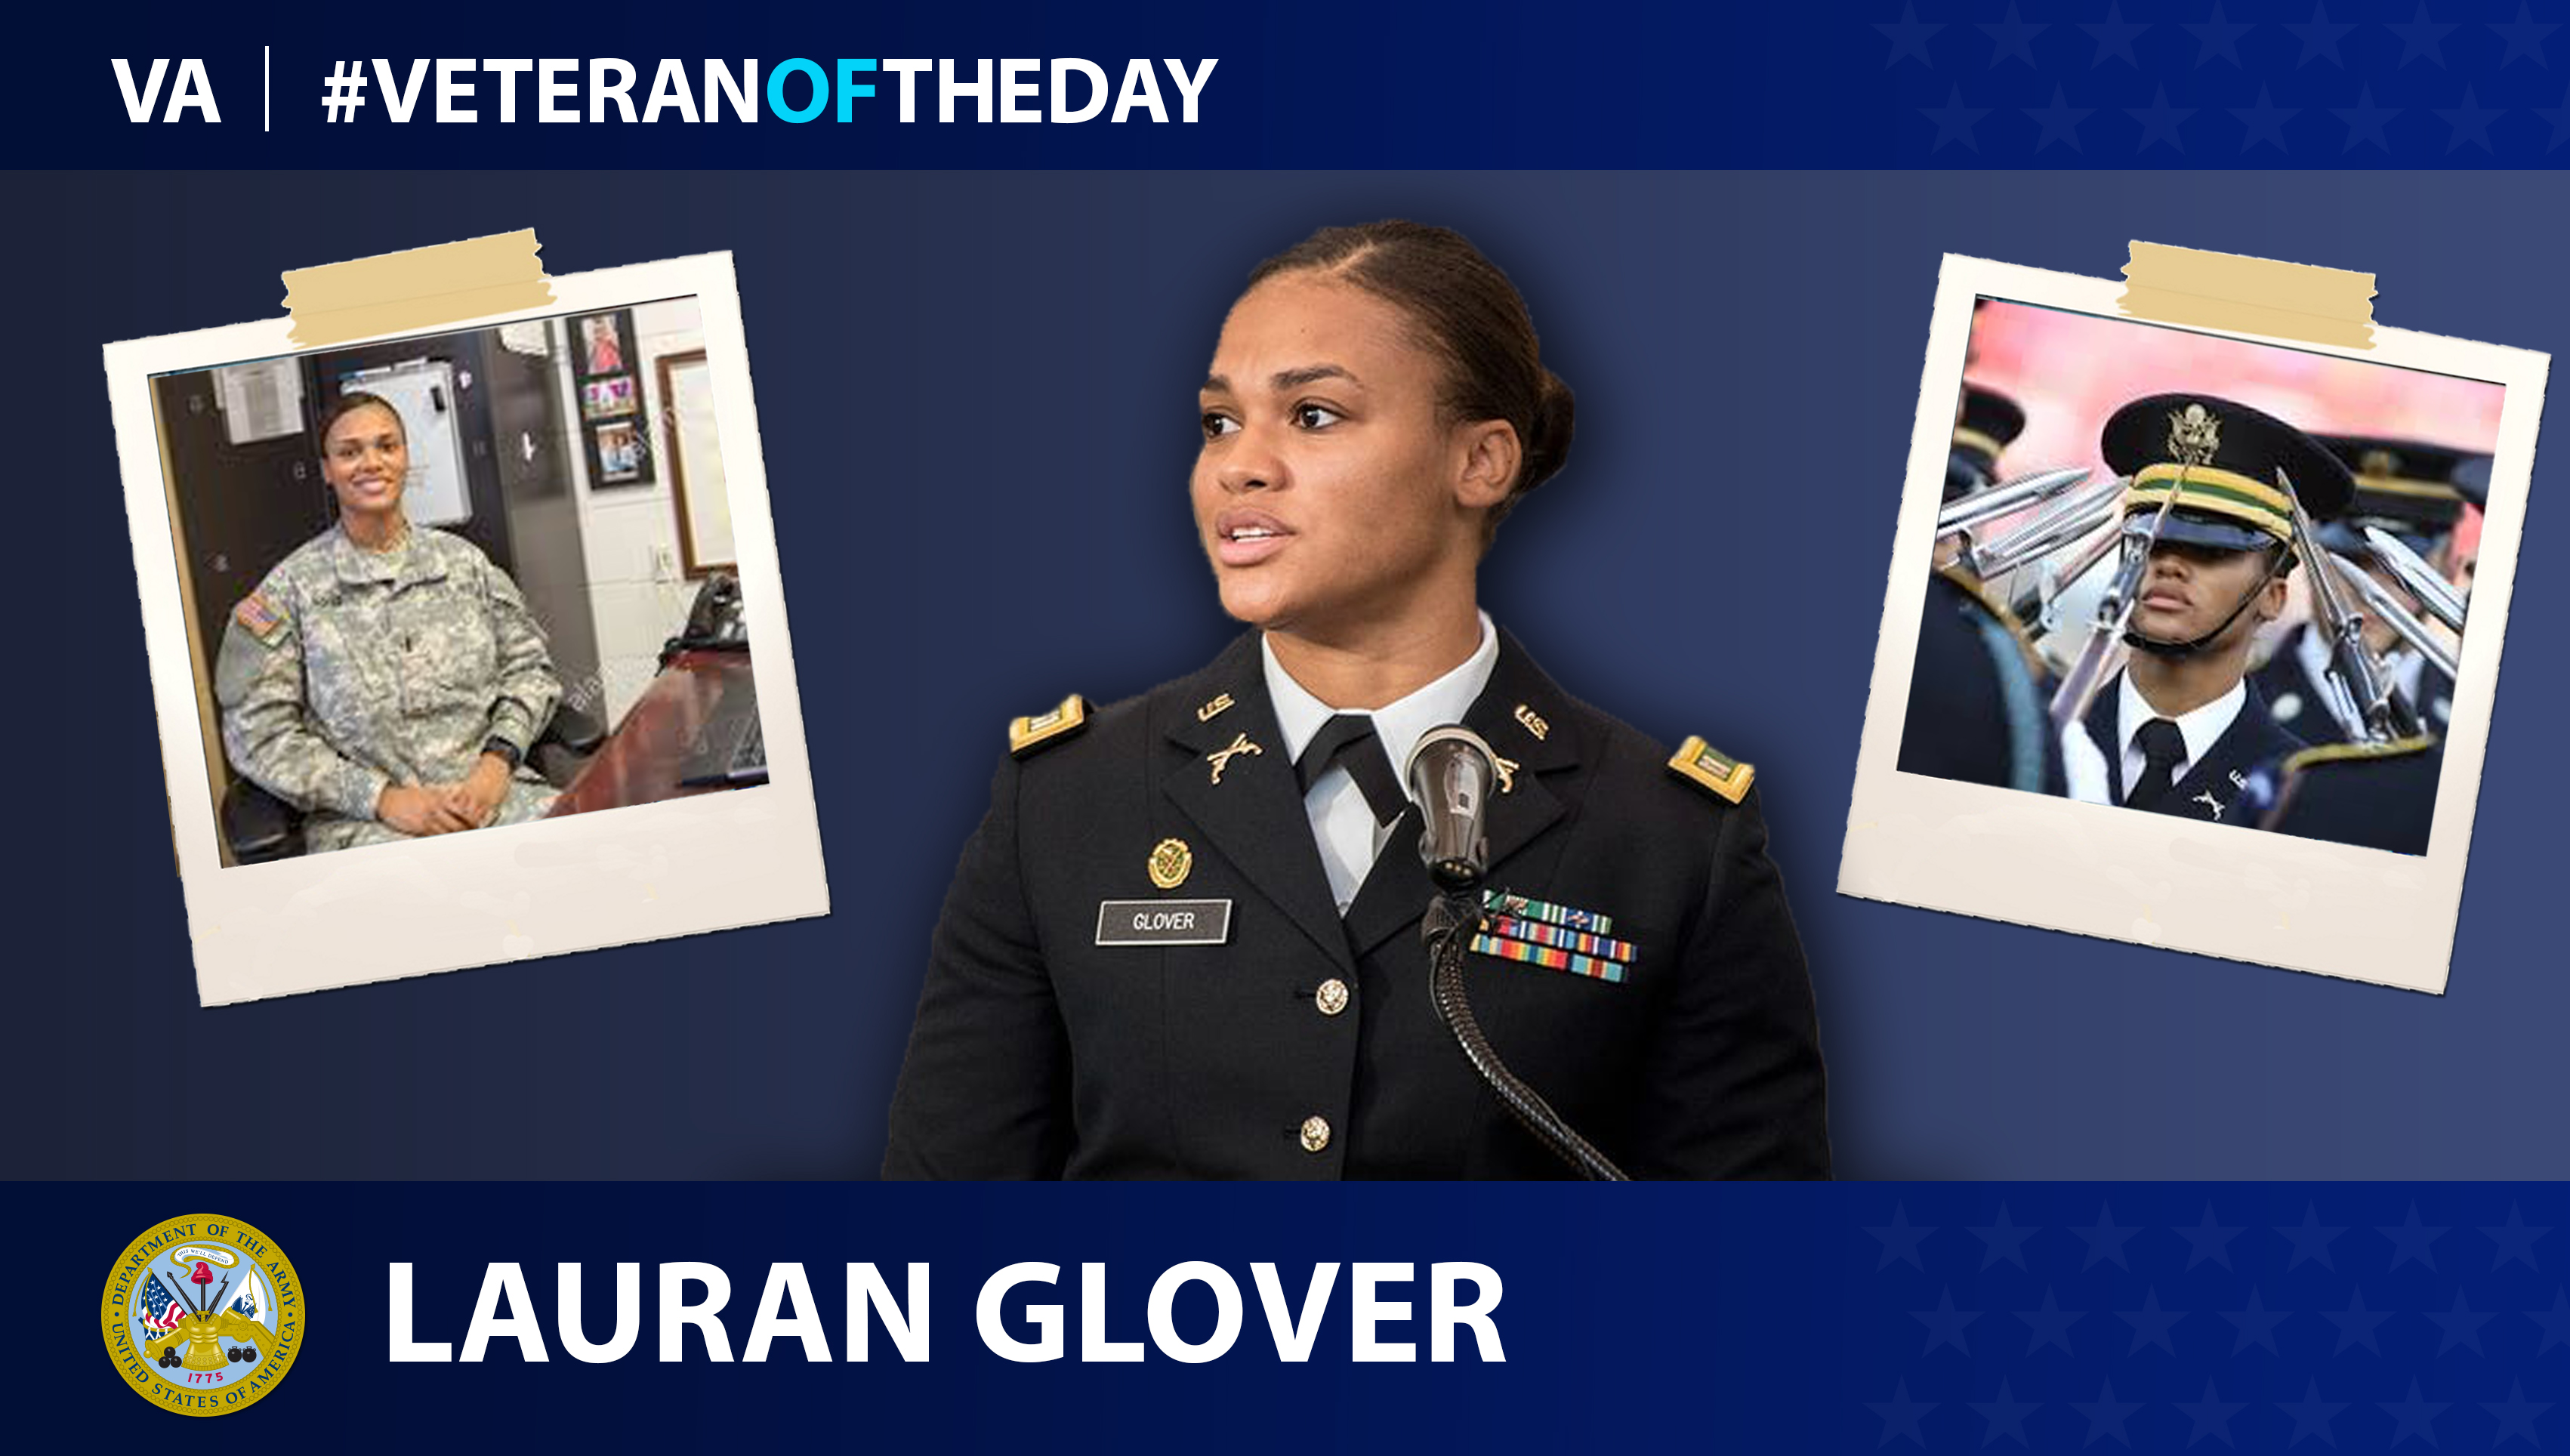 Army Veteran Lauran Glover is today's Veteran of the day.